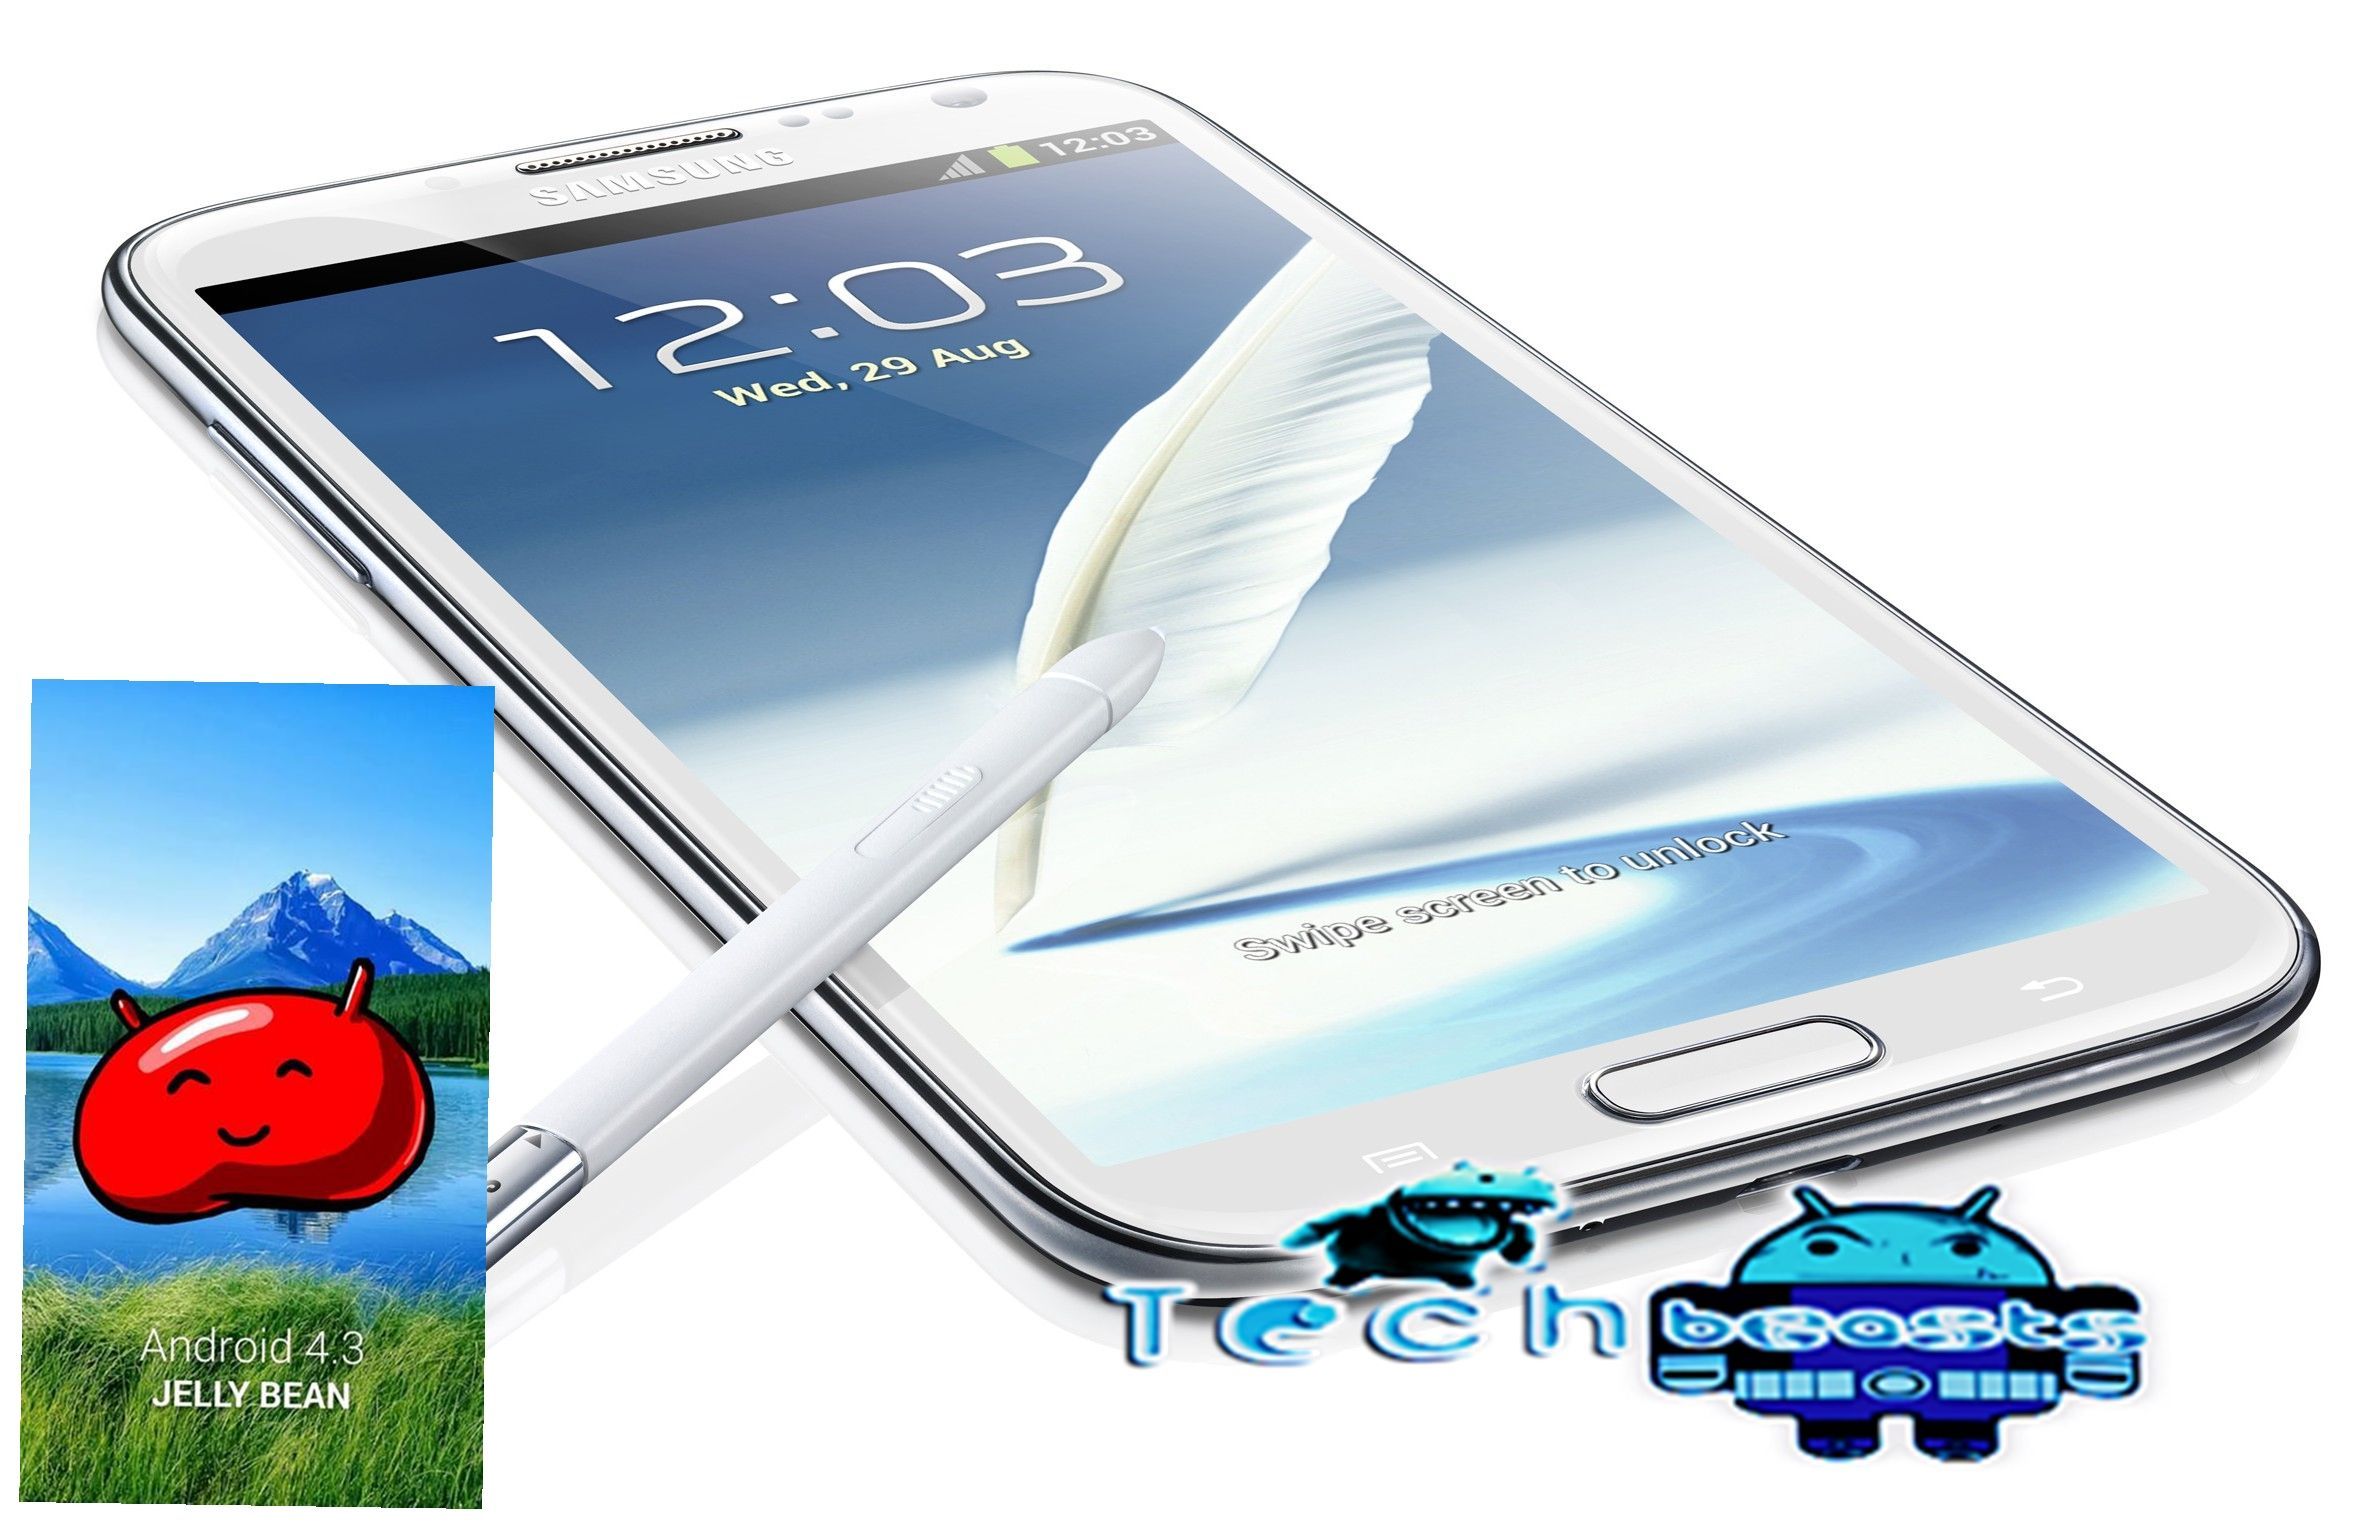 galaxy note 2 firmware download